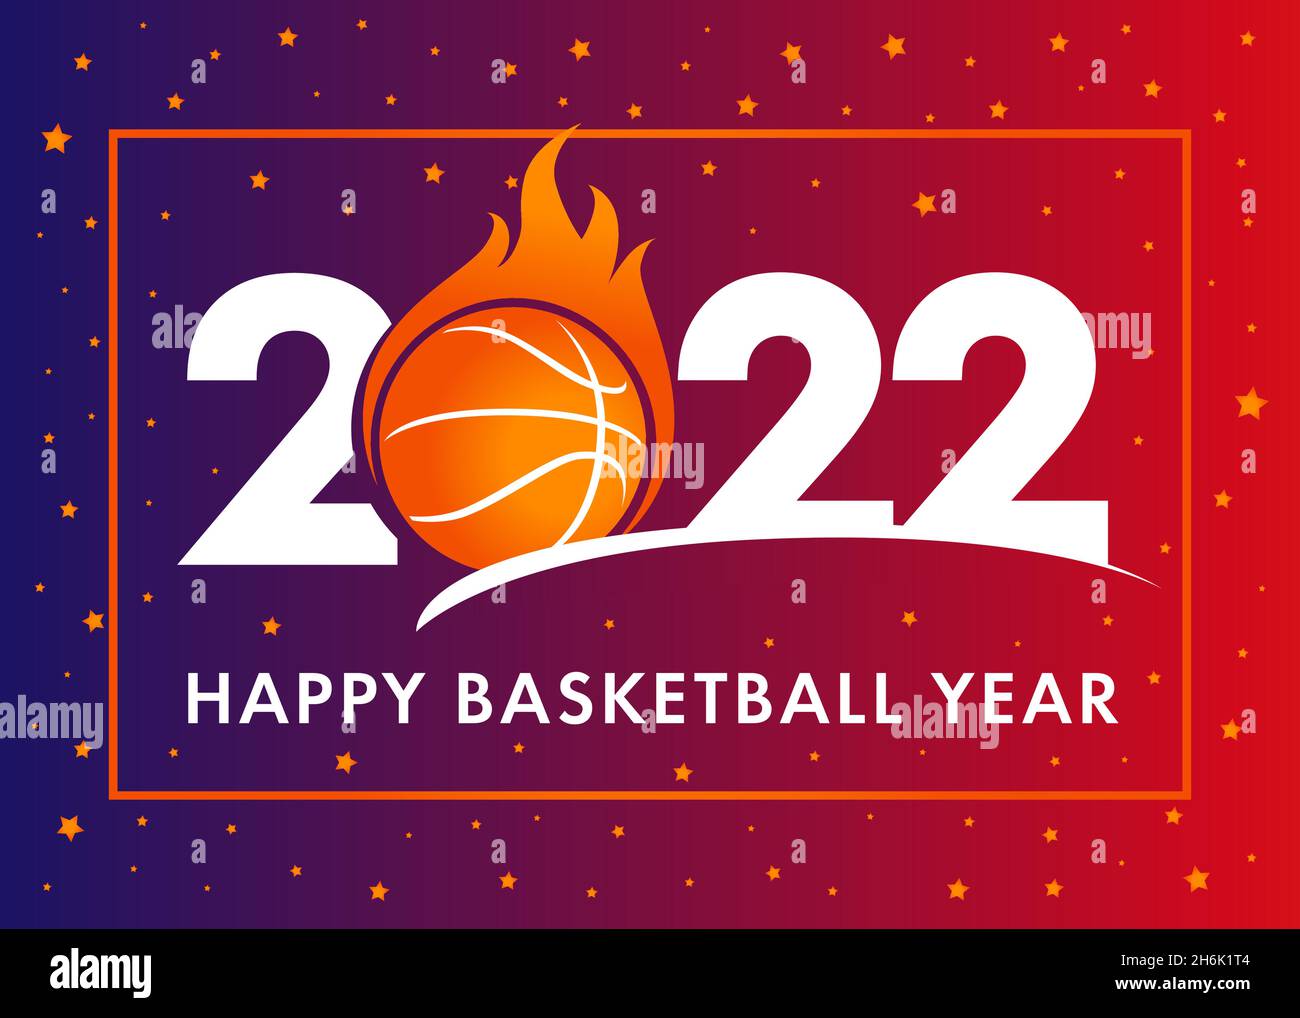 Happy Basketball Year 2022. Sport cover background with logo 2022 with ball in fire and orange stars. Vector Illustration for tournament banner Stock Vector